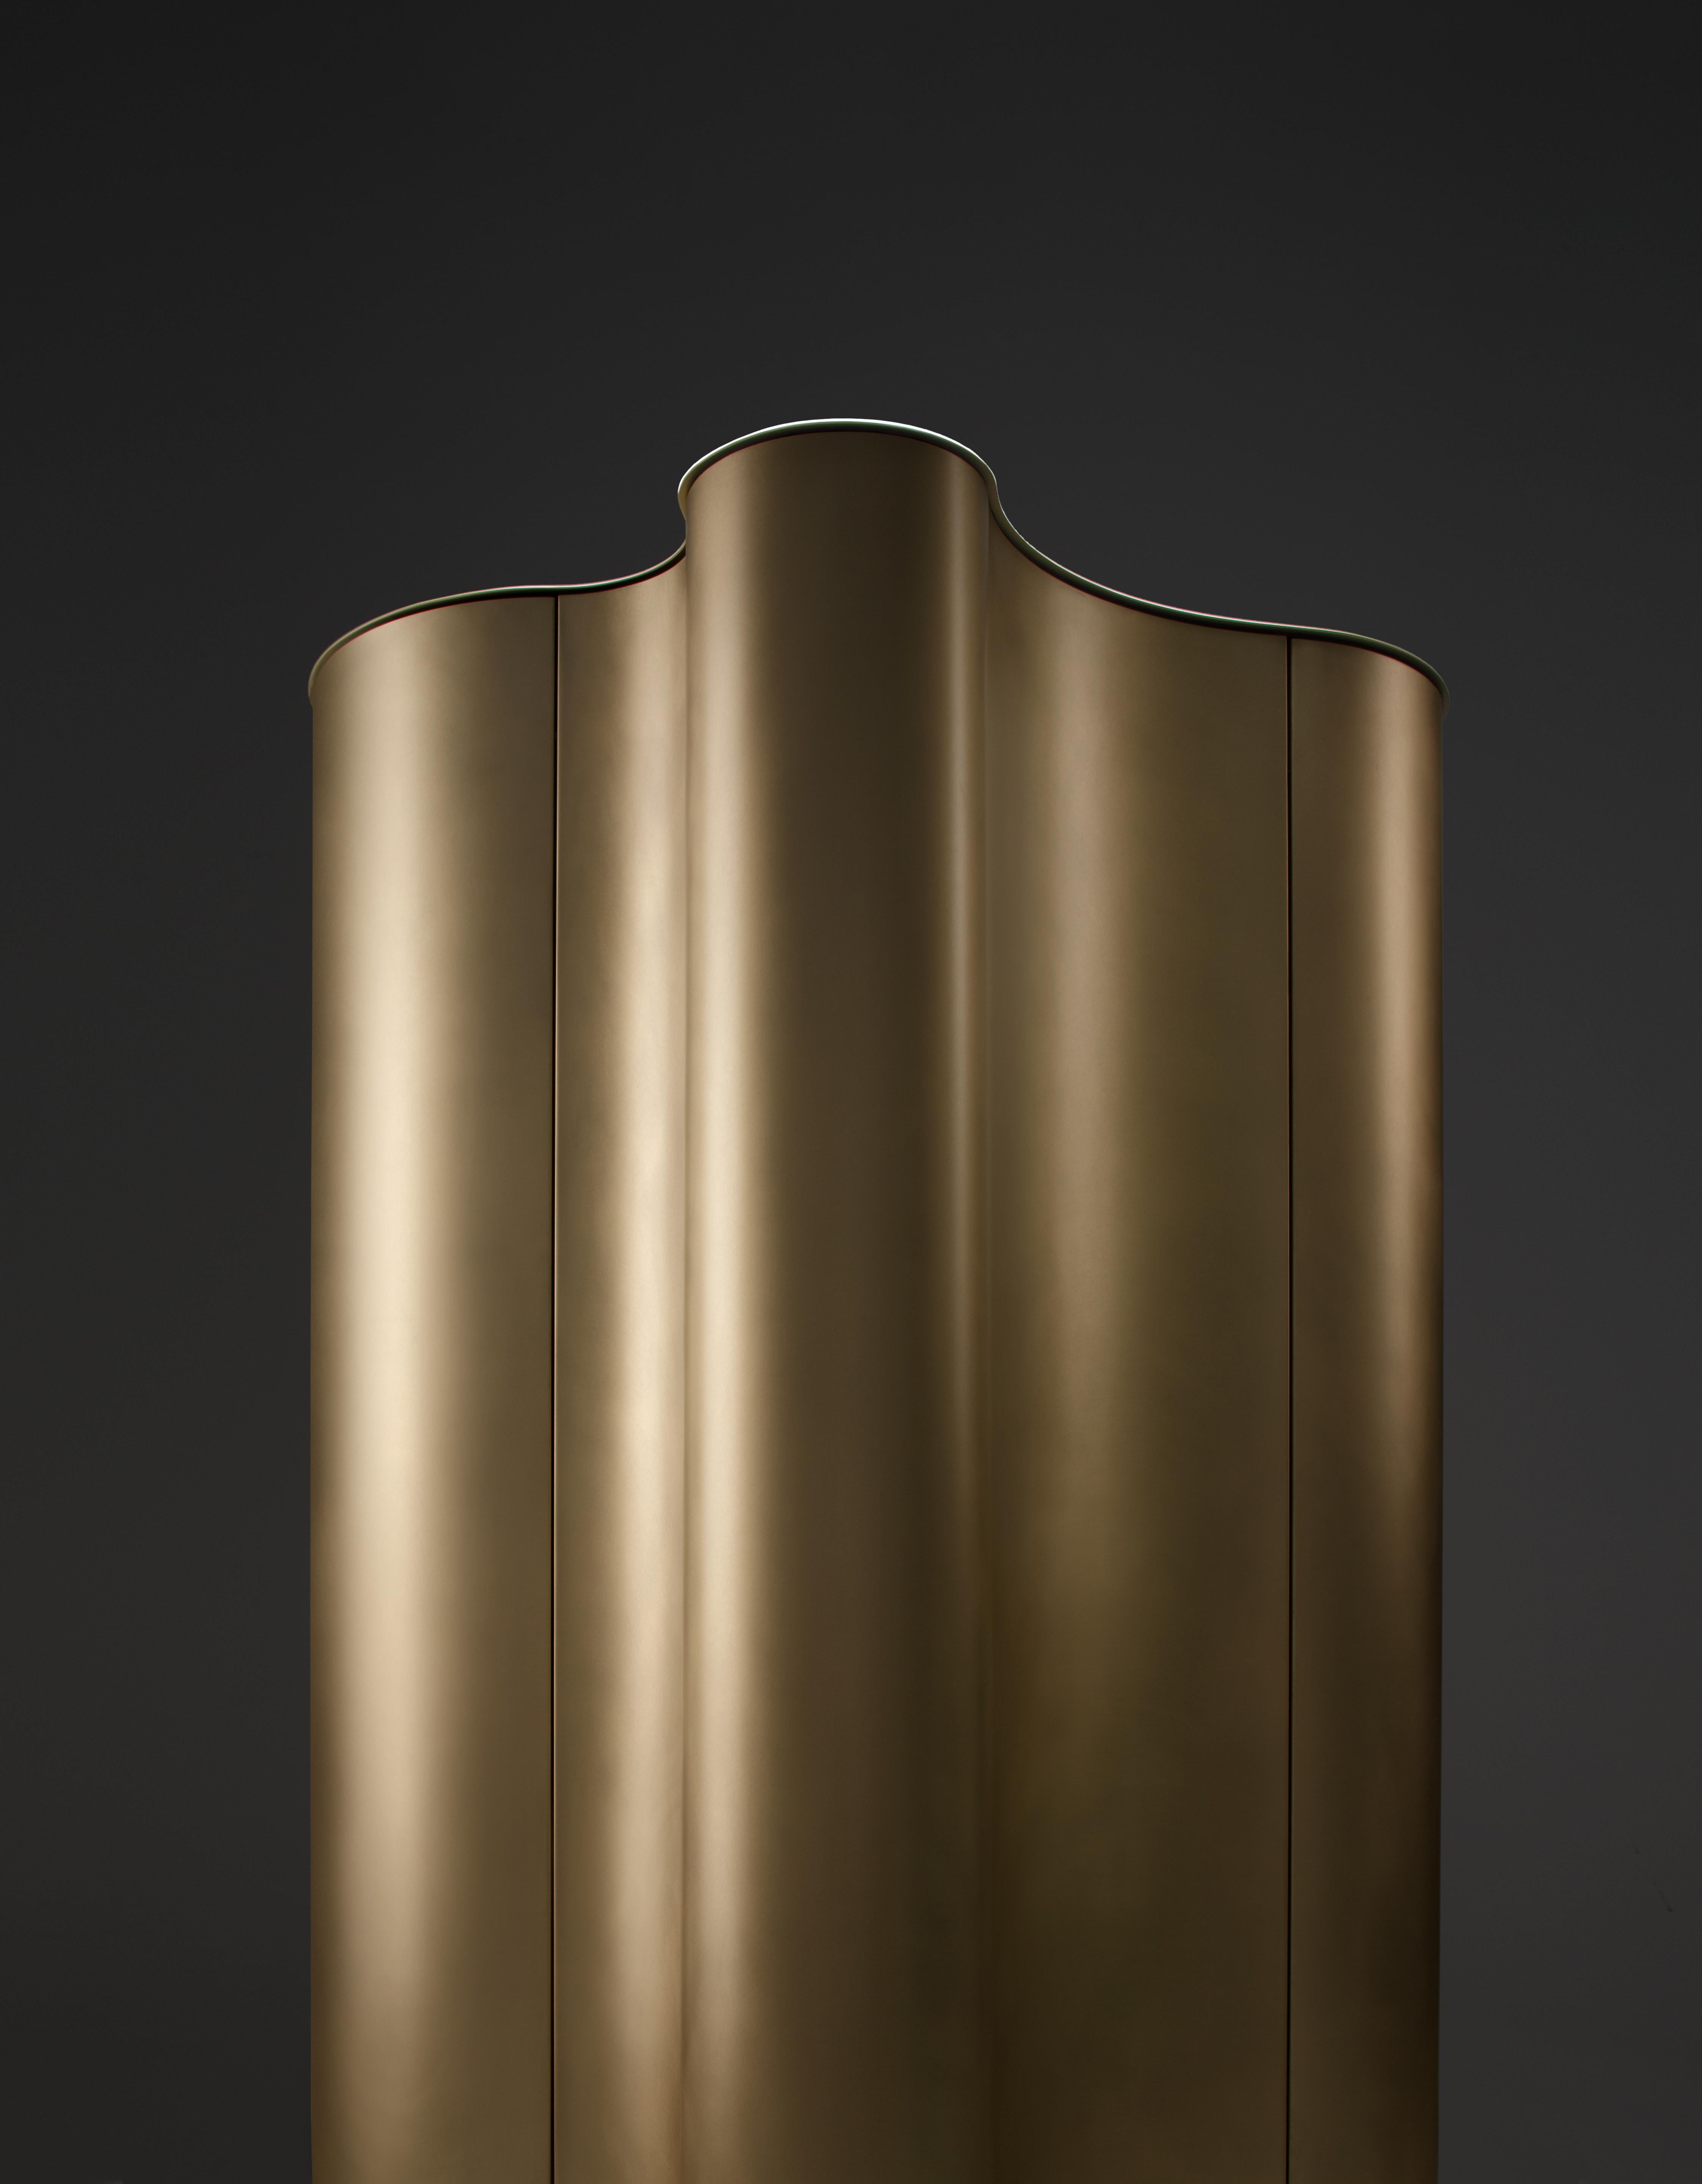 The Ripple cabinet is inspired by the fluidity and adaptability of water, and the texture of metal, expertly worked by the company. The result is a sinuous, polymorphous volume in which soft lines generate reflections upon a metal surface shaped by